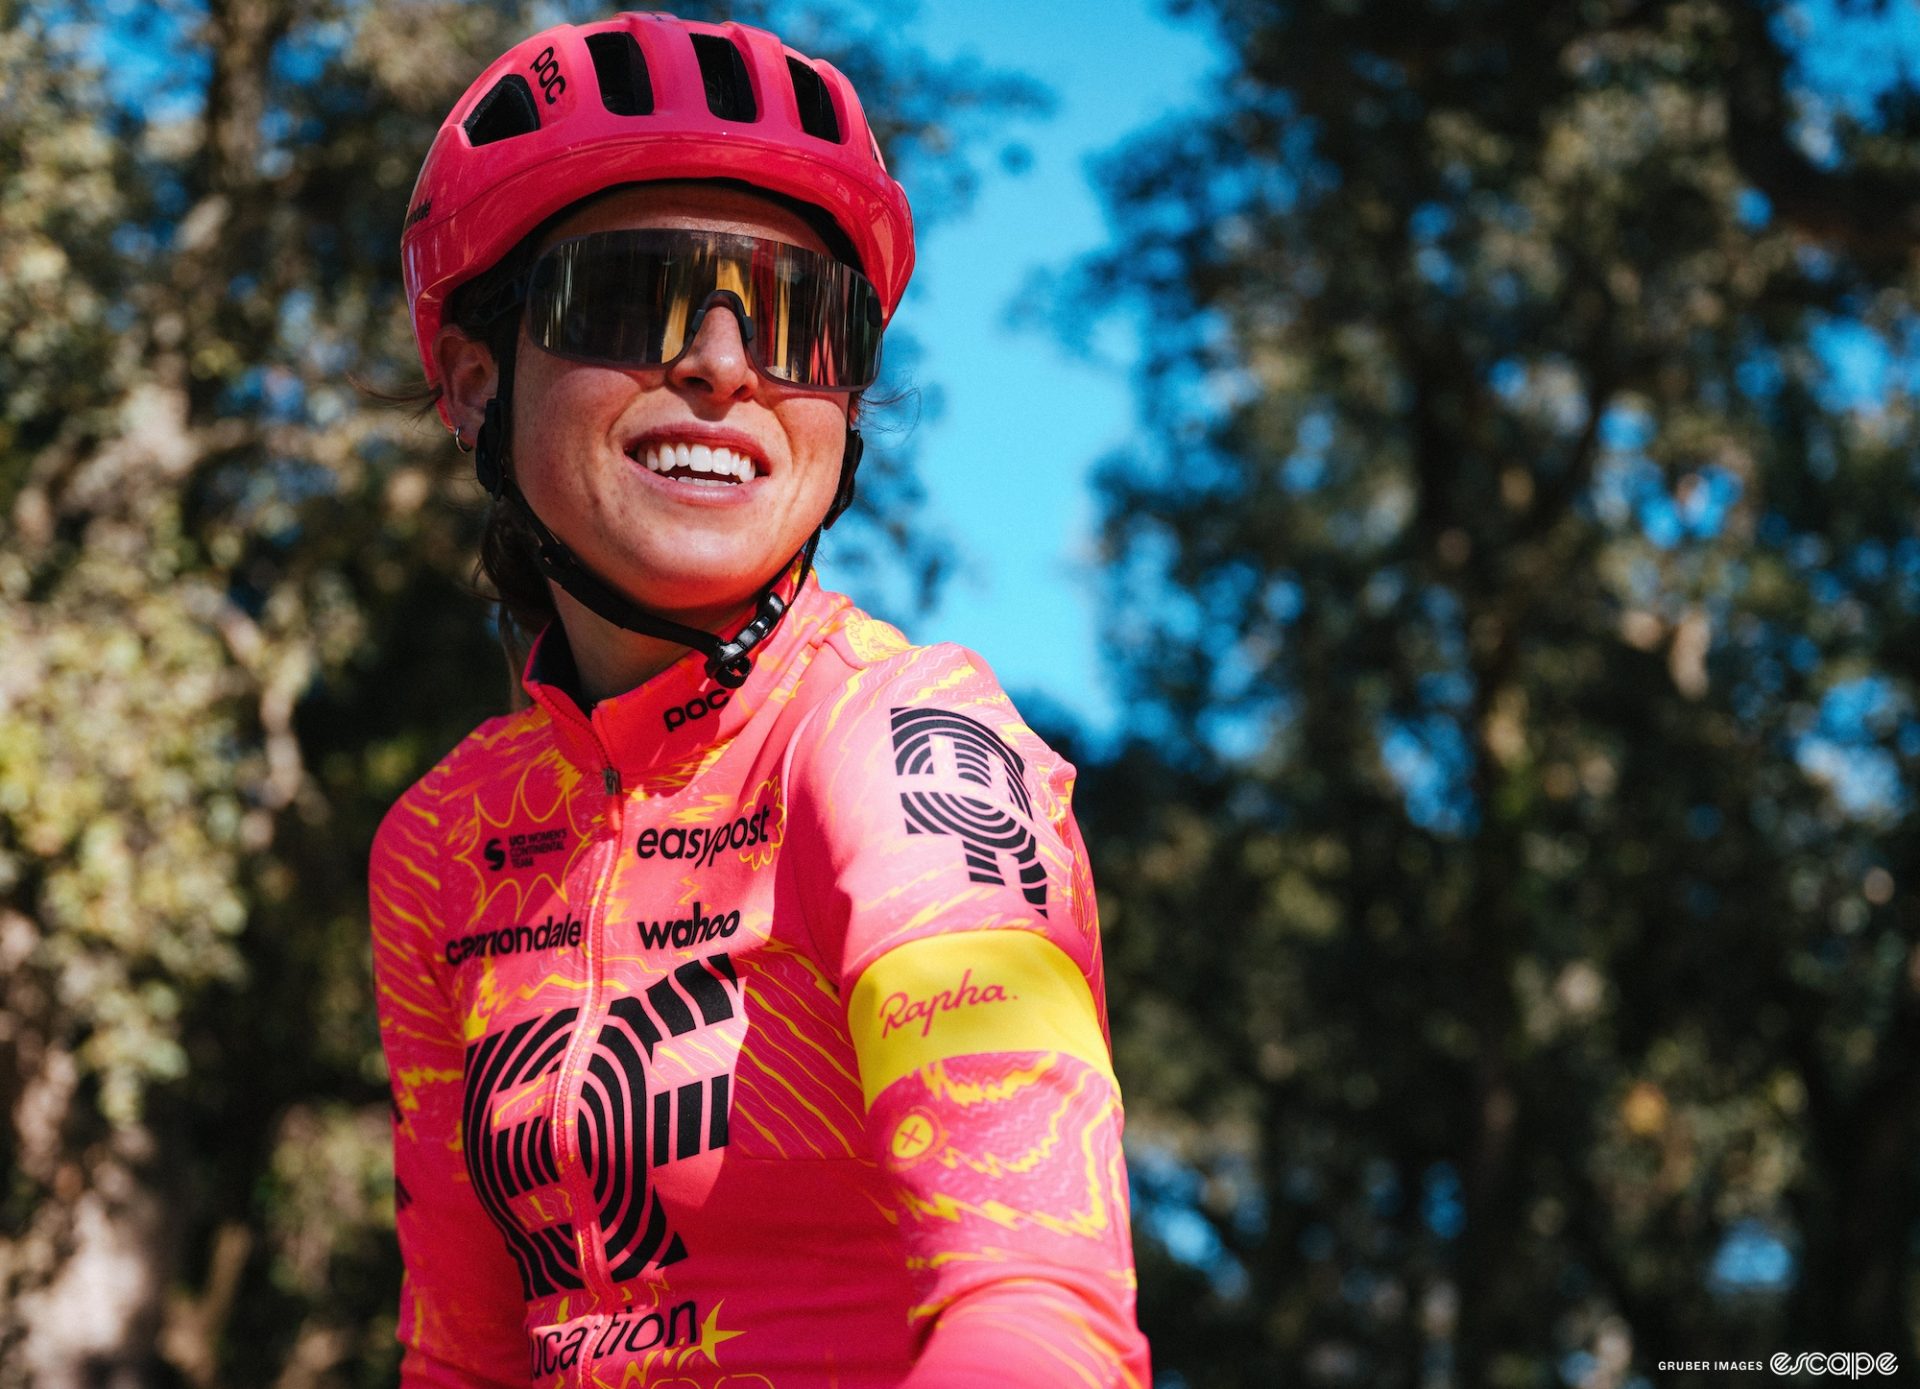 EF Education First's jerseys are an unmistakeable pink with yellow splatters and yellow armband.